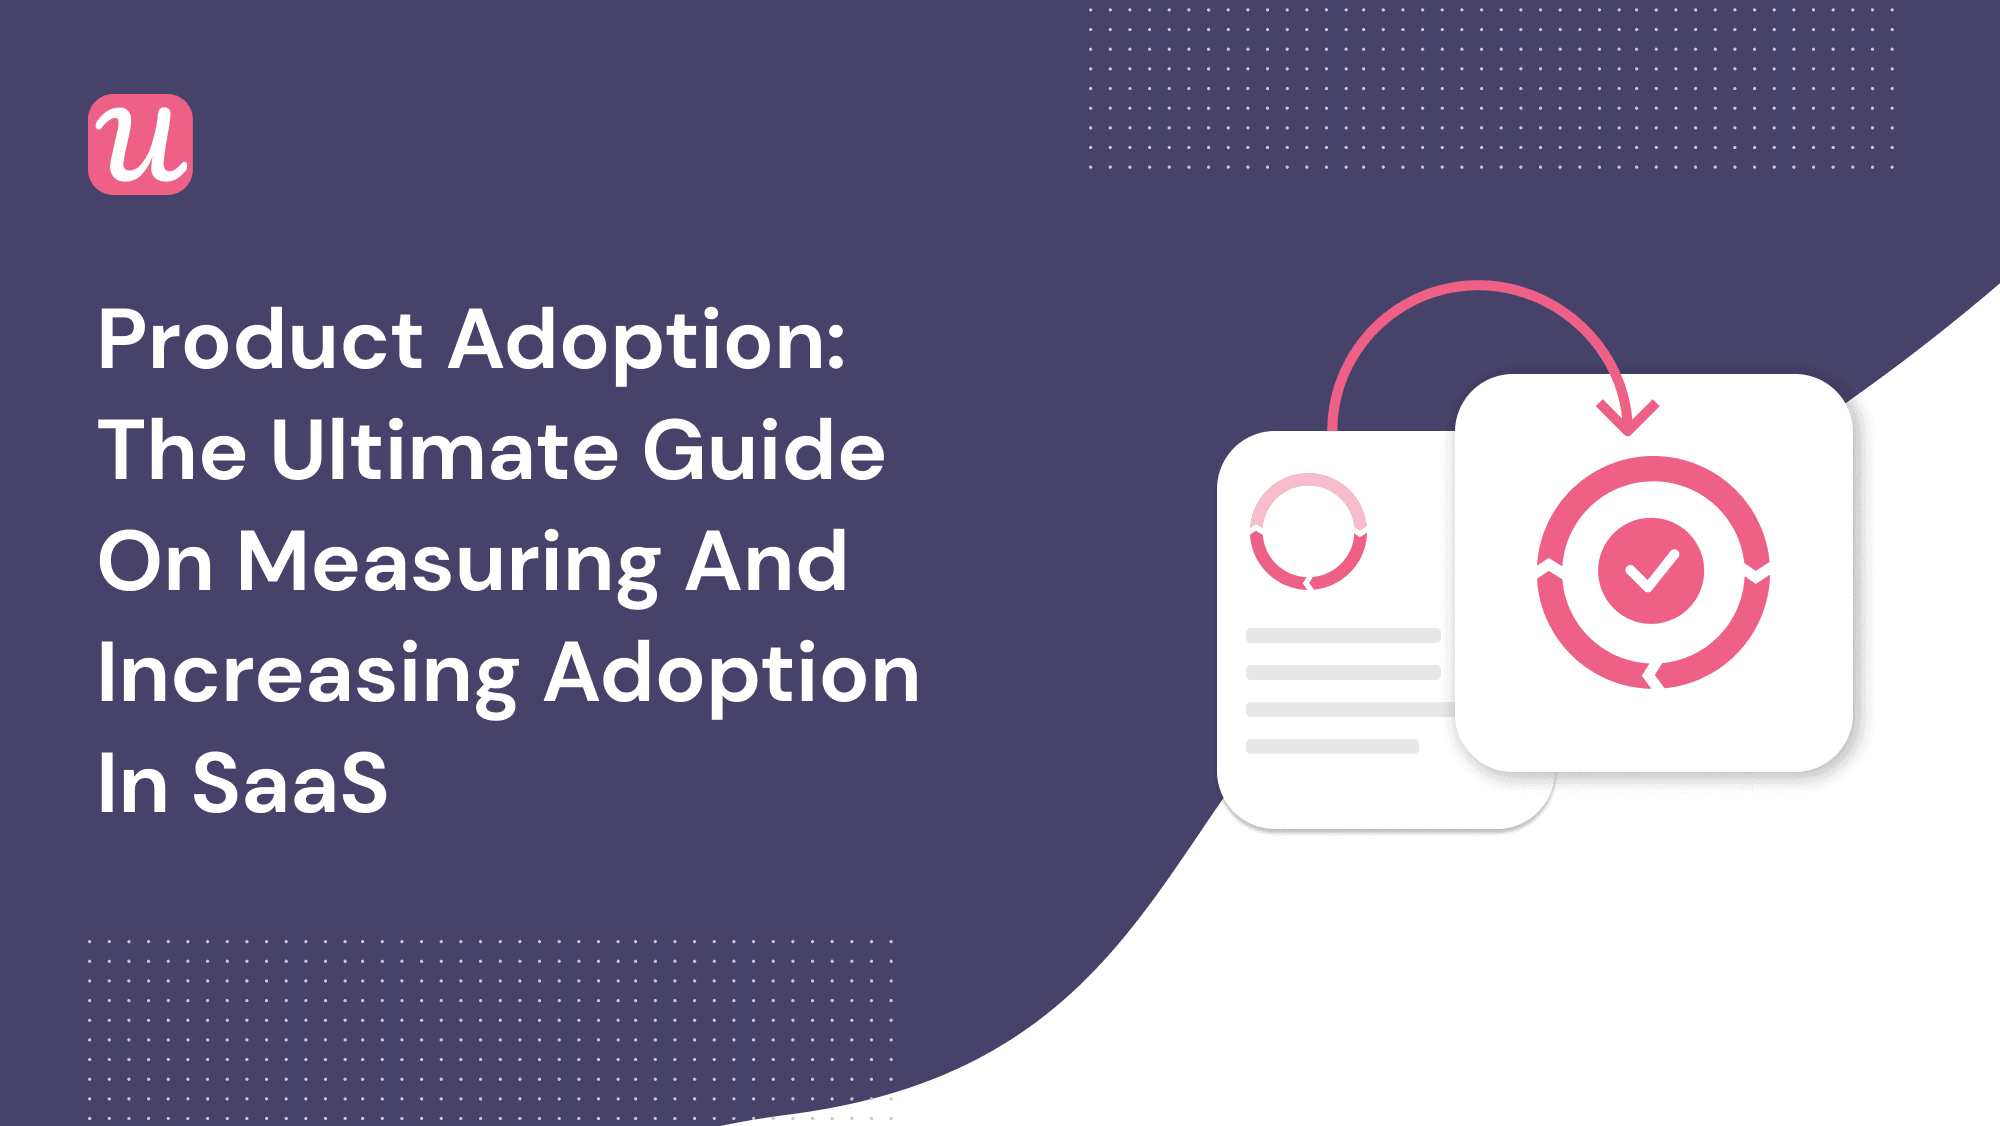 Product Adoption in 2021: The Ultimate Guide